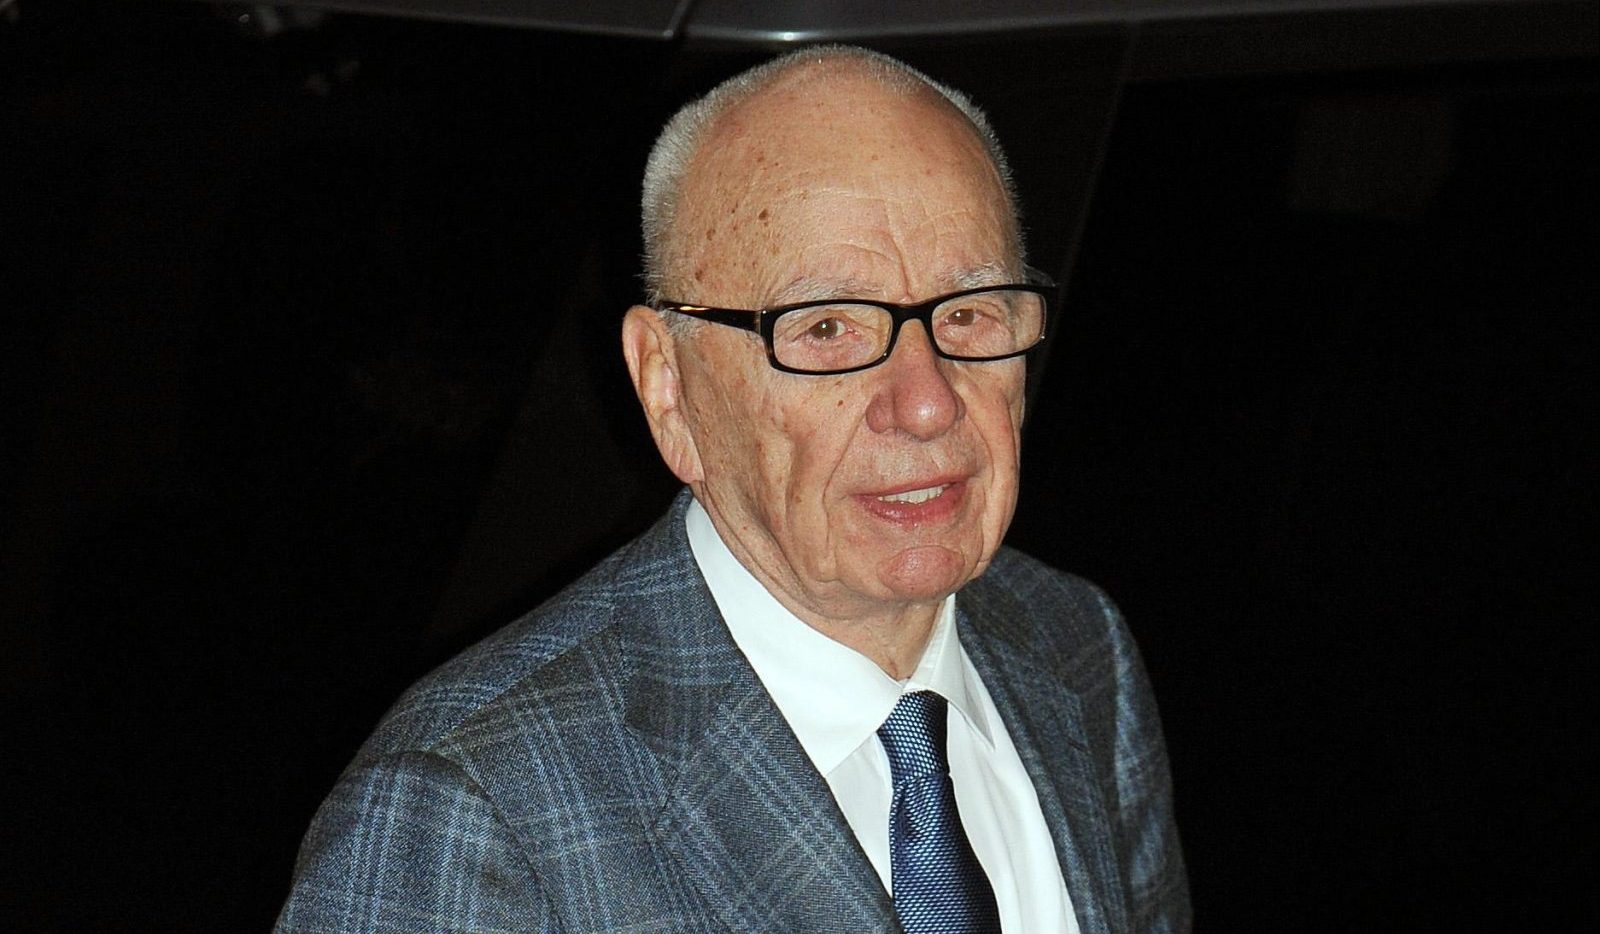 Murdoch cans plans for Fox-style rolling news channel